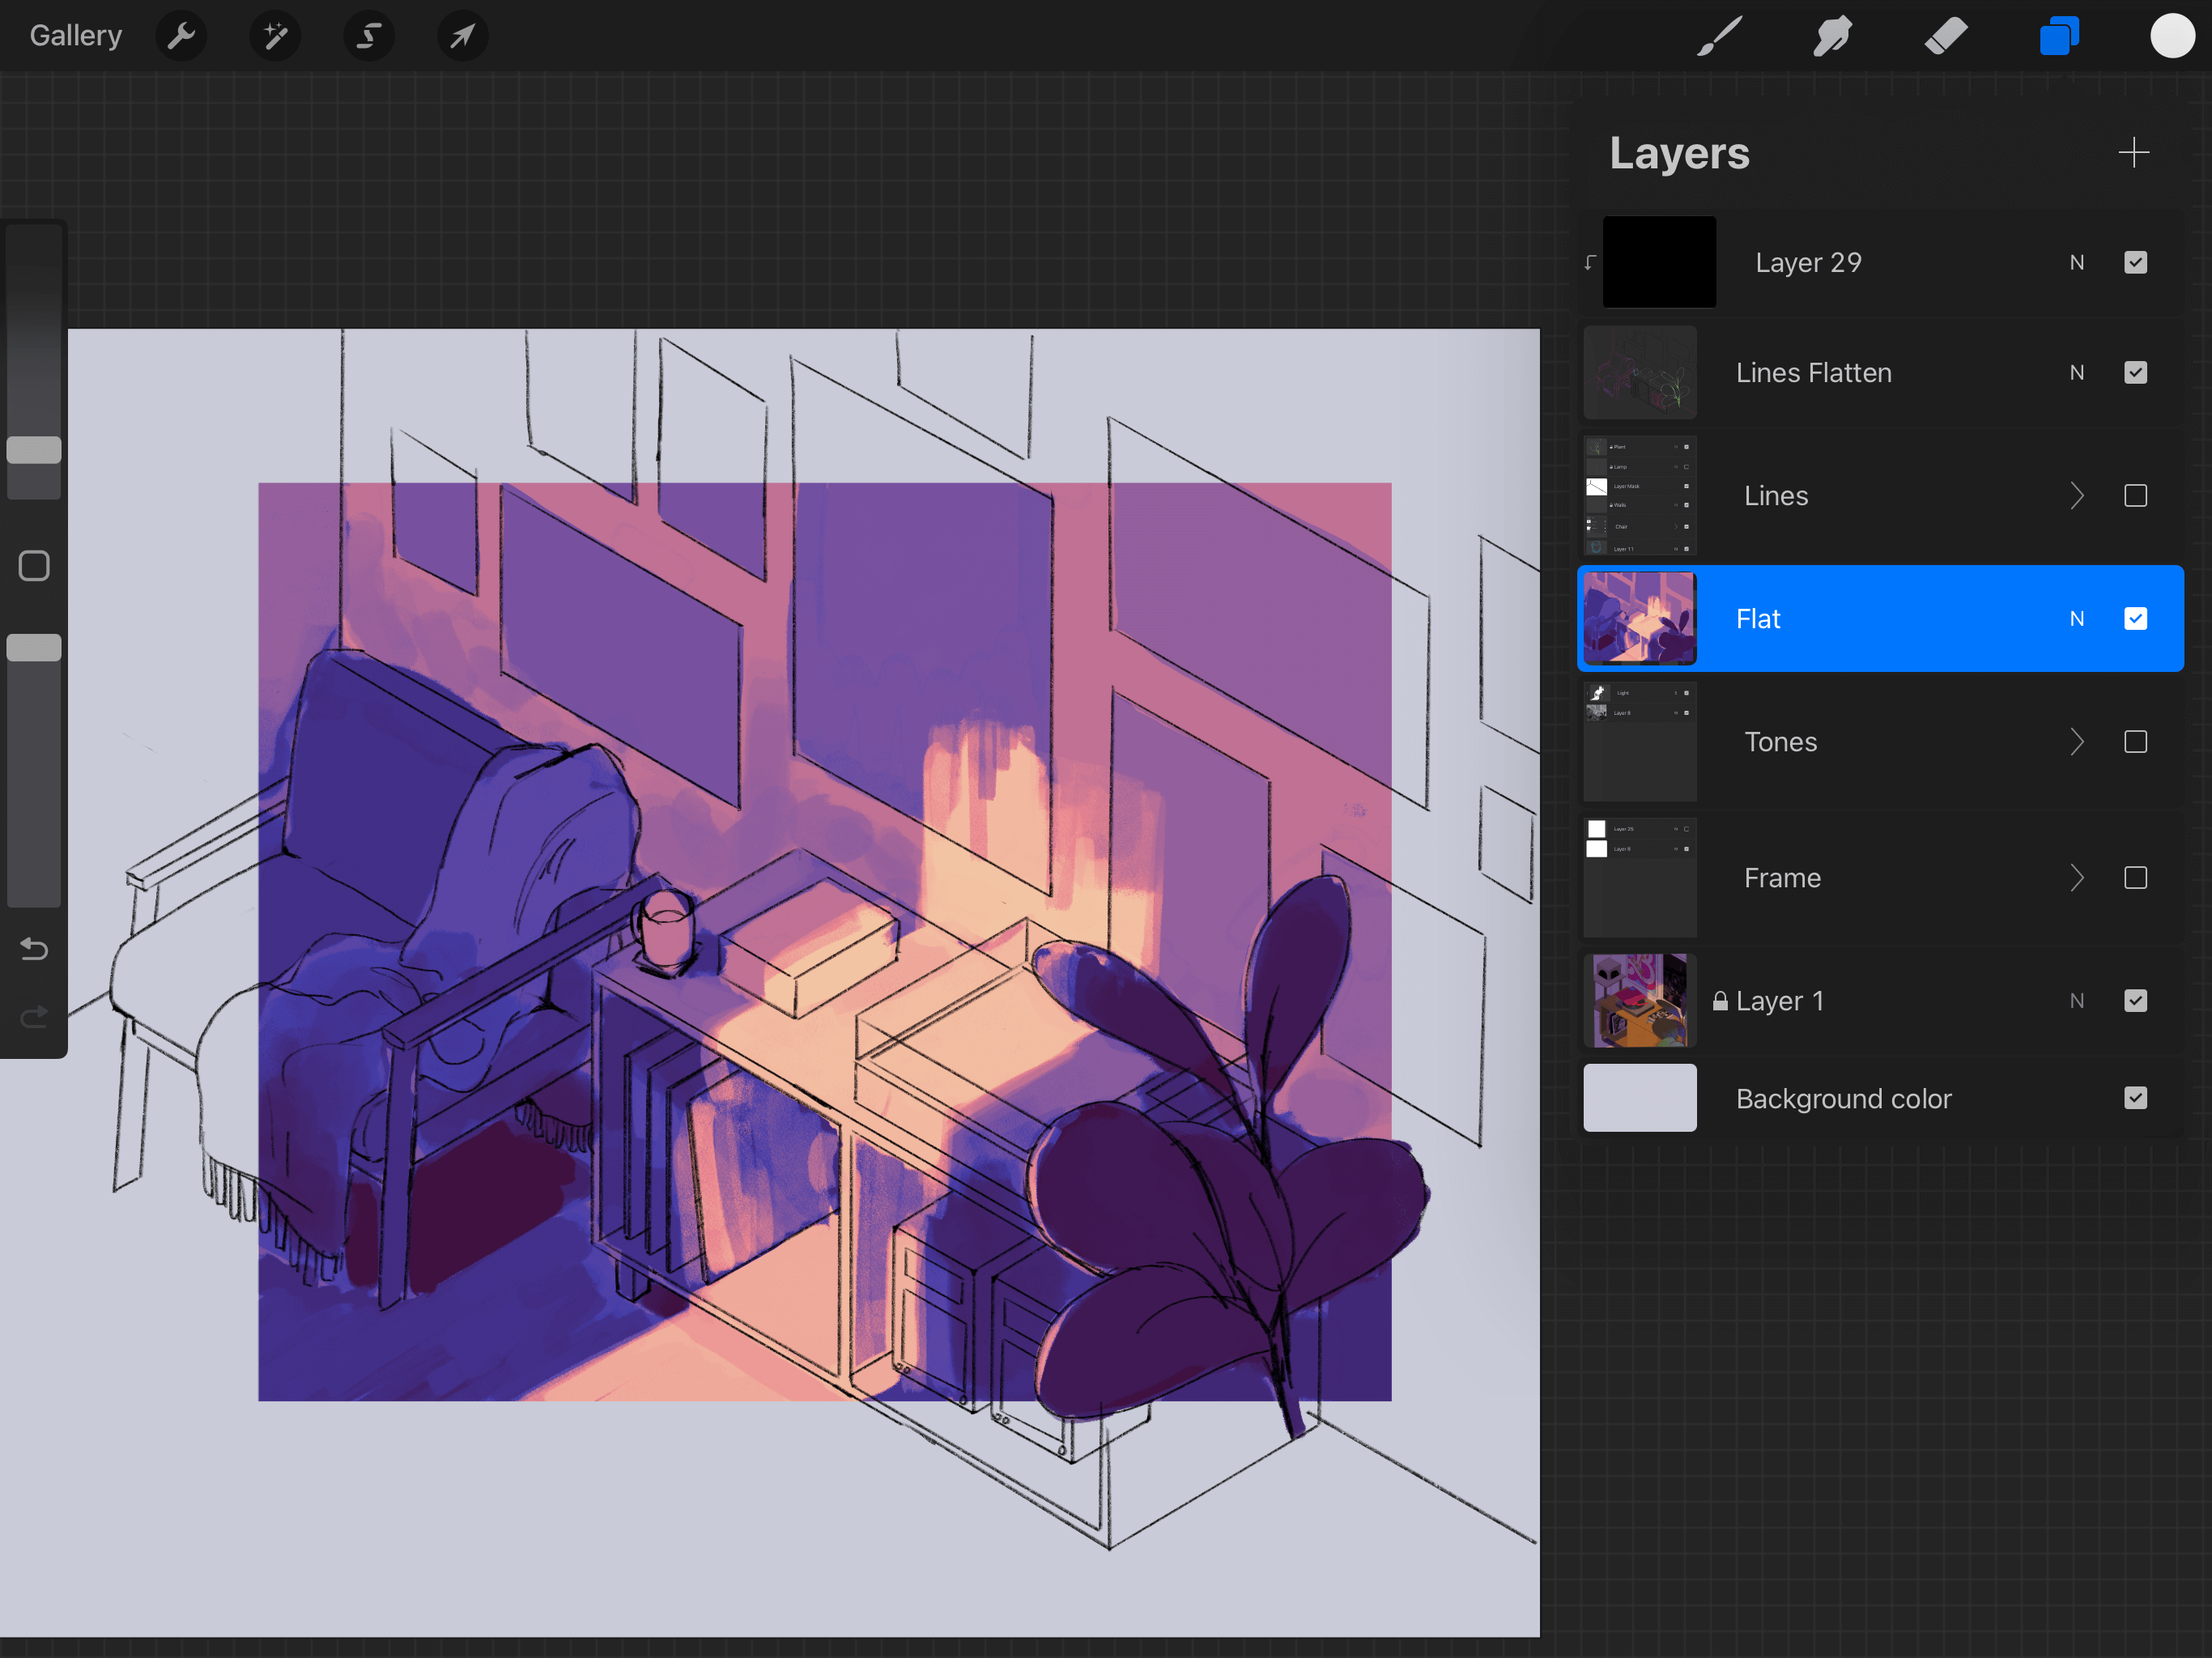 The same room sketch, but in colour where light tones are a yellowish pink and dark tones and purple